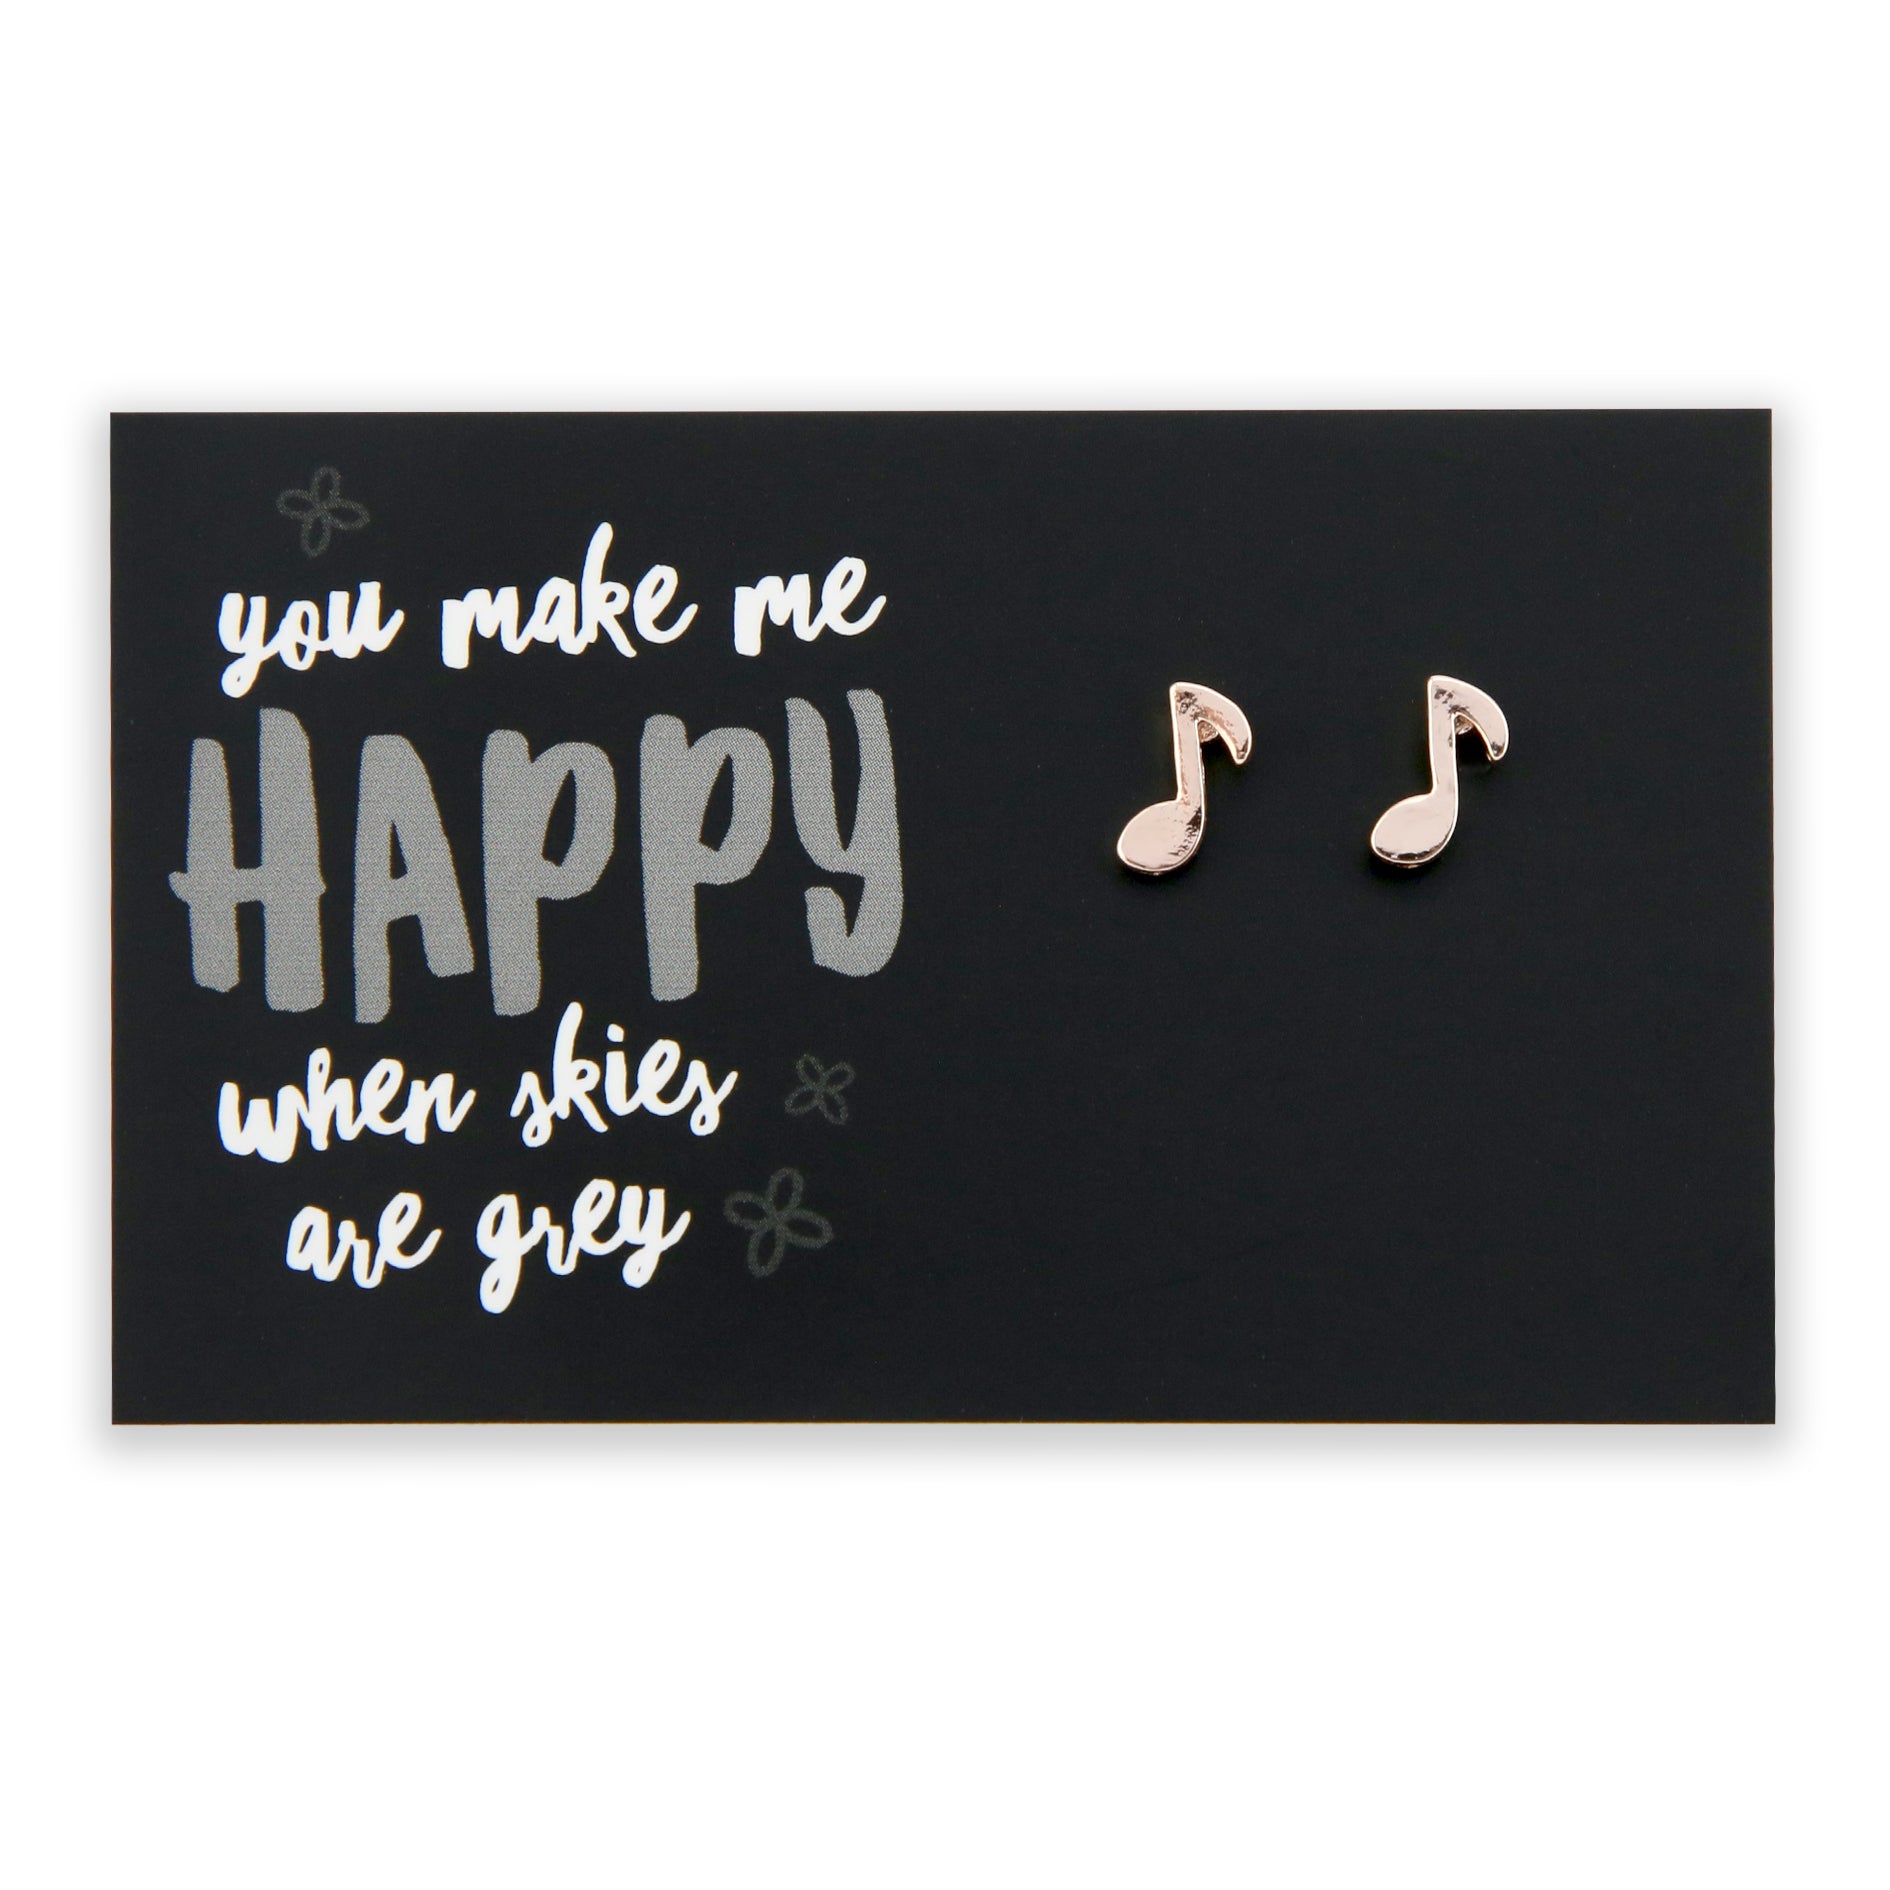 Music note shaped earring studs in rose gold, on you make me happy when skies are grey card.